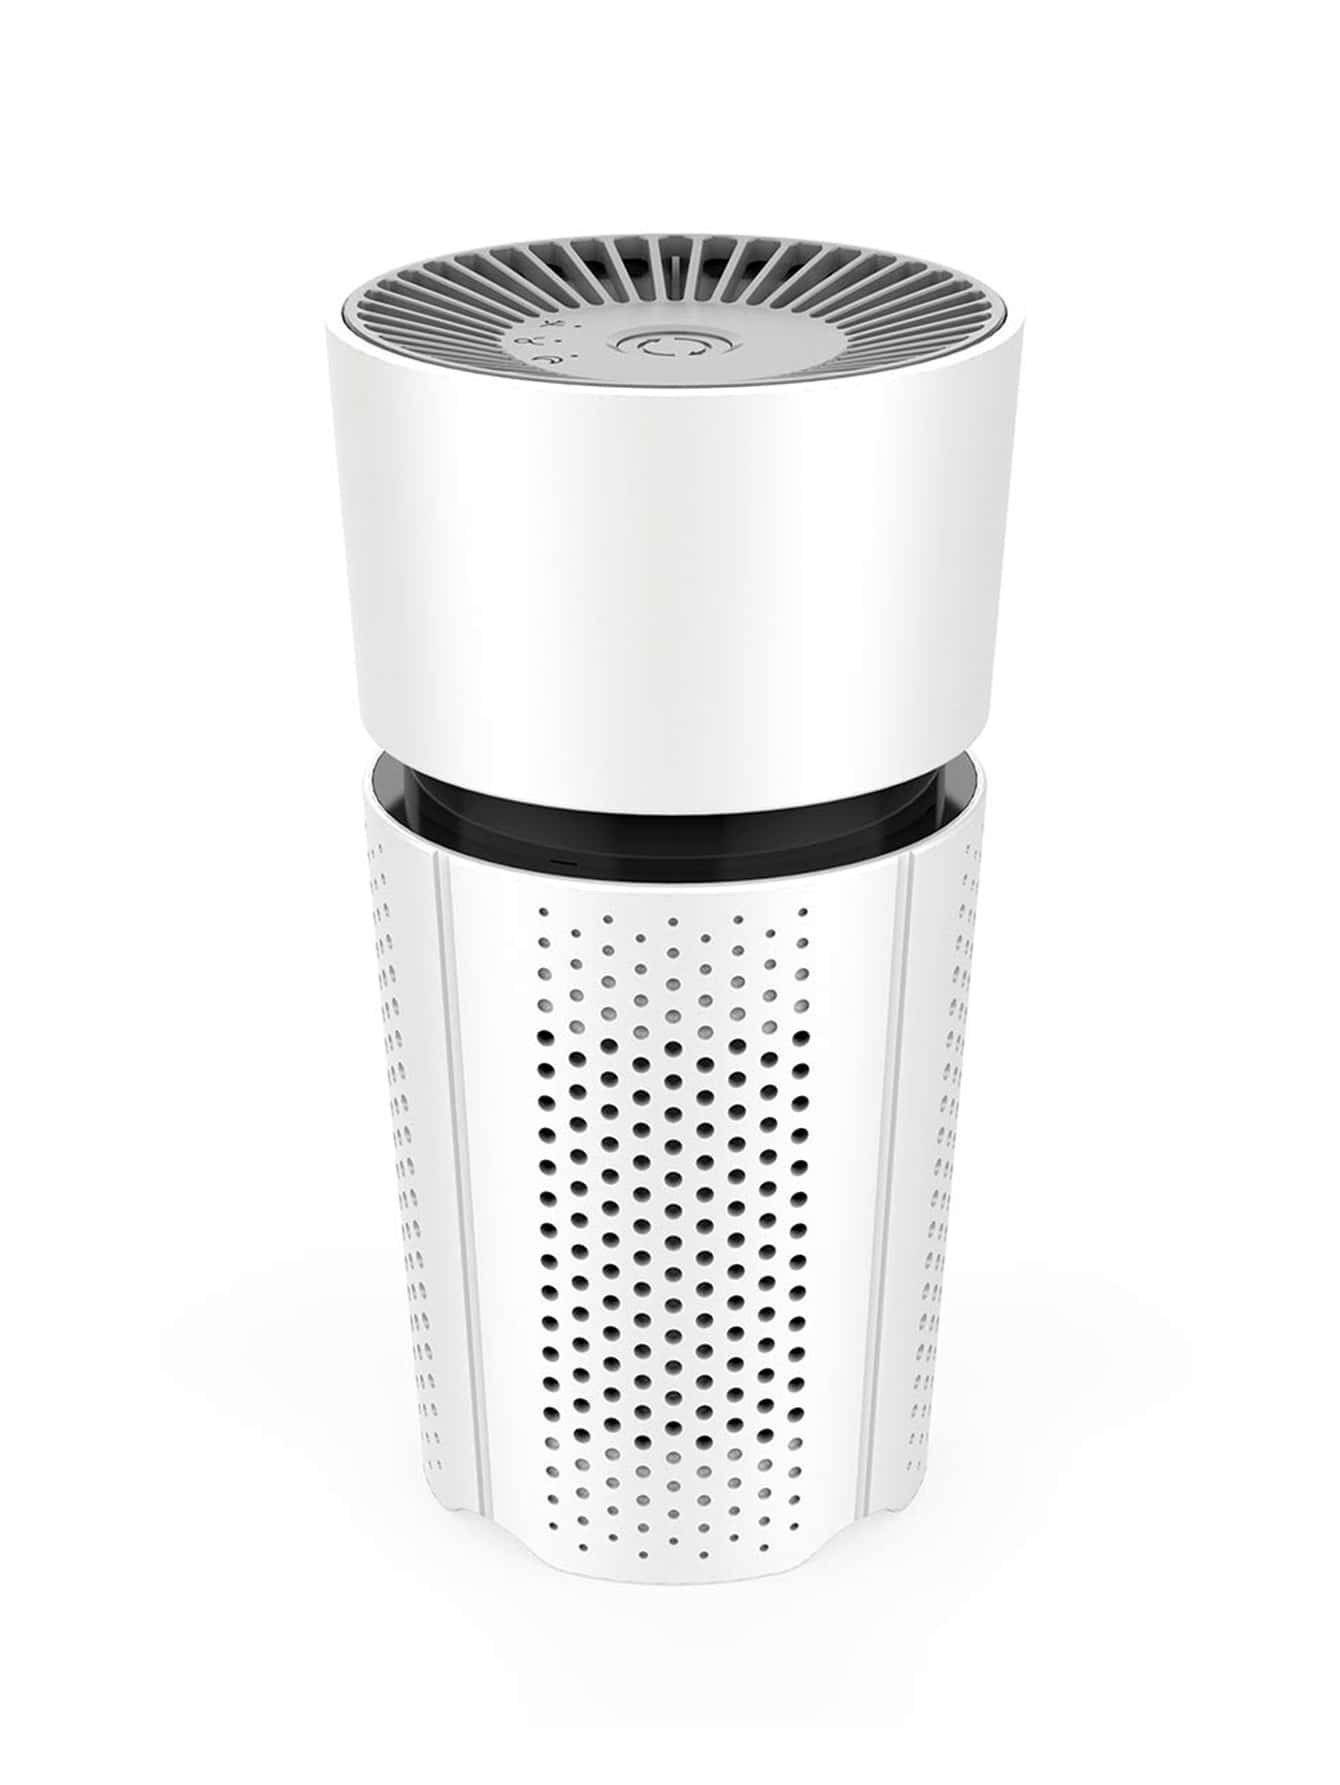 1pc Usb-powered Air Purifier M6, Suitable For Bedroom, Car, Office, Desktop Use-White-2